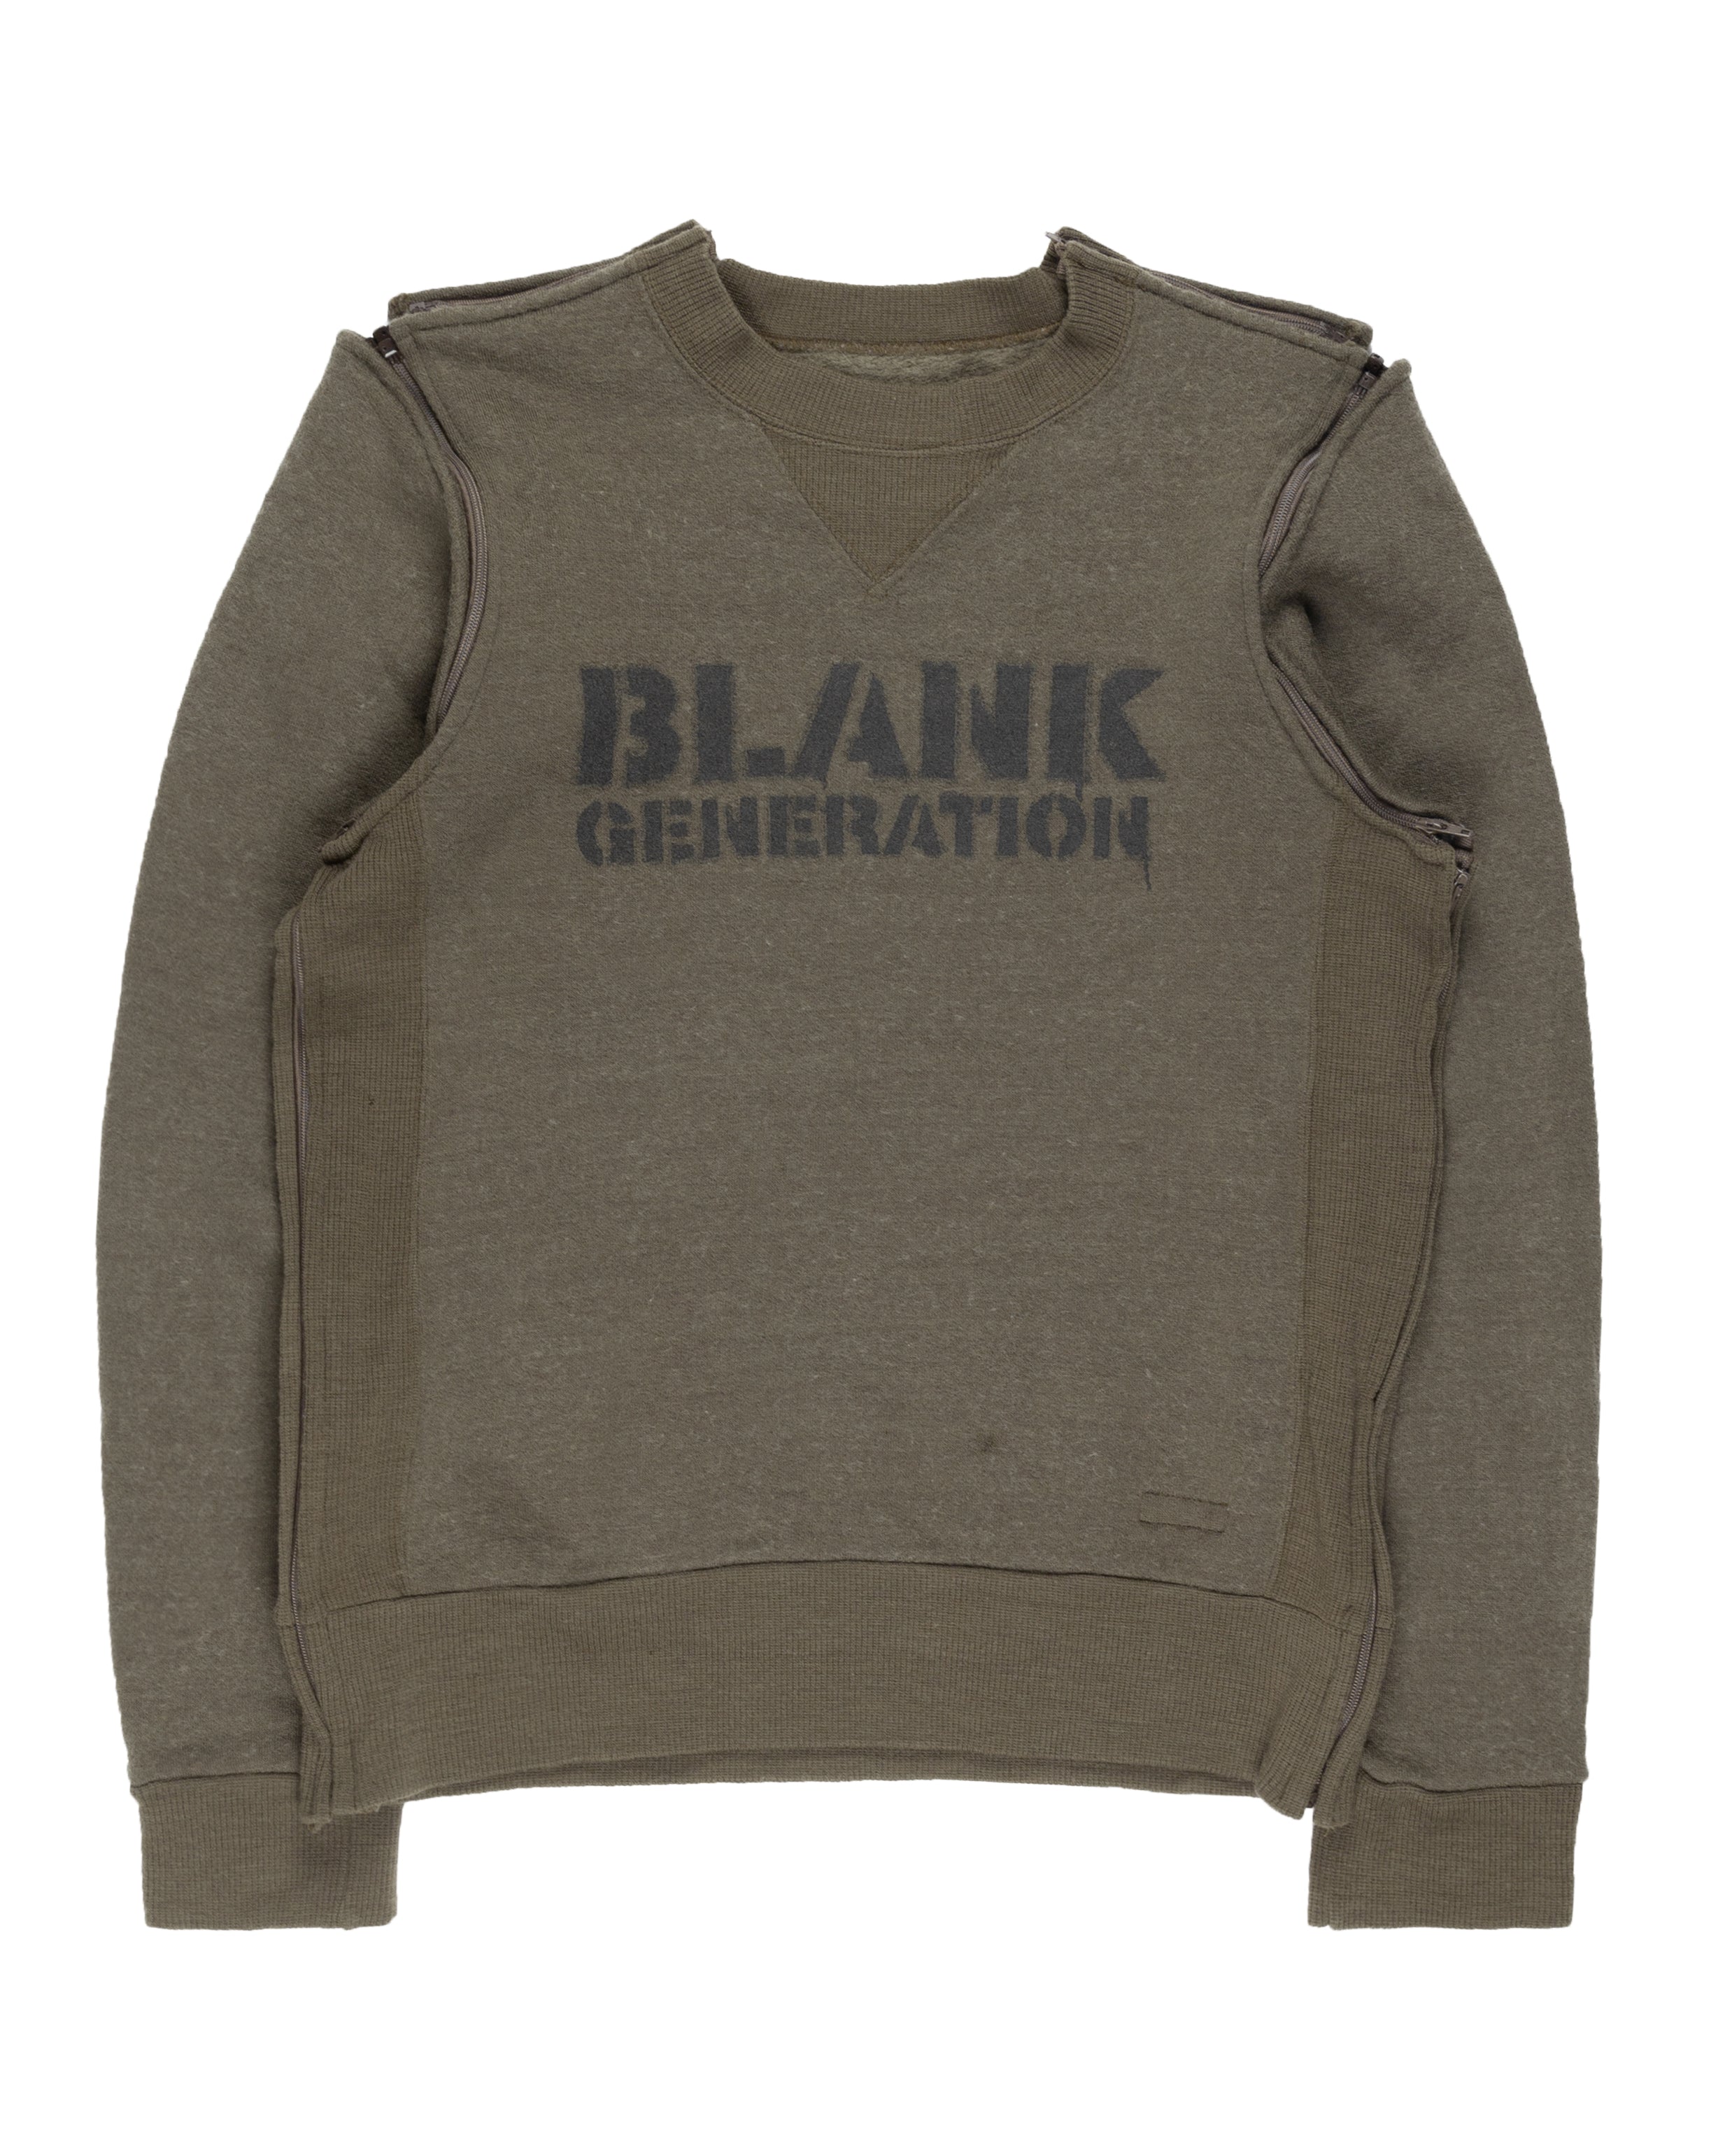 Undercover Blank Generation Olive Sweater - AW99 “Ambivalence”